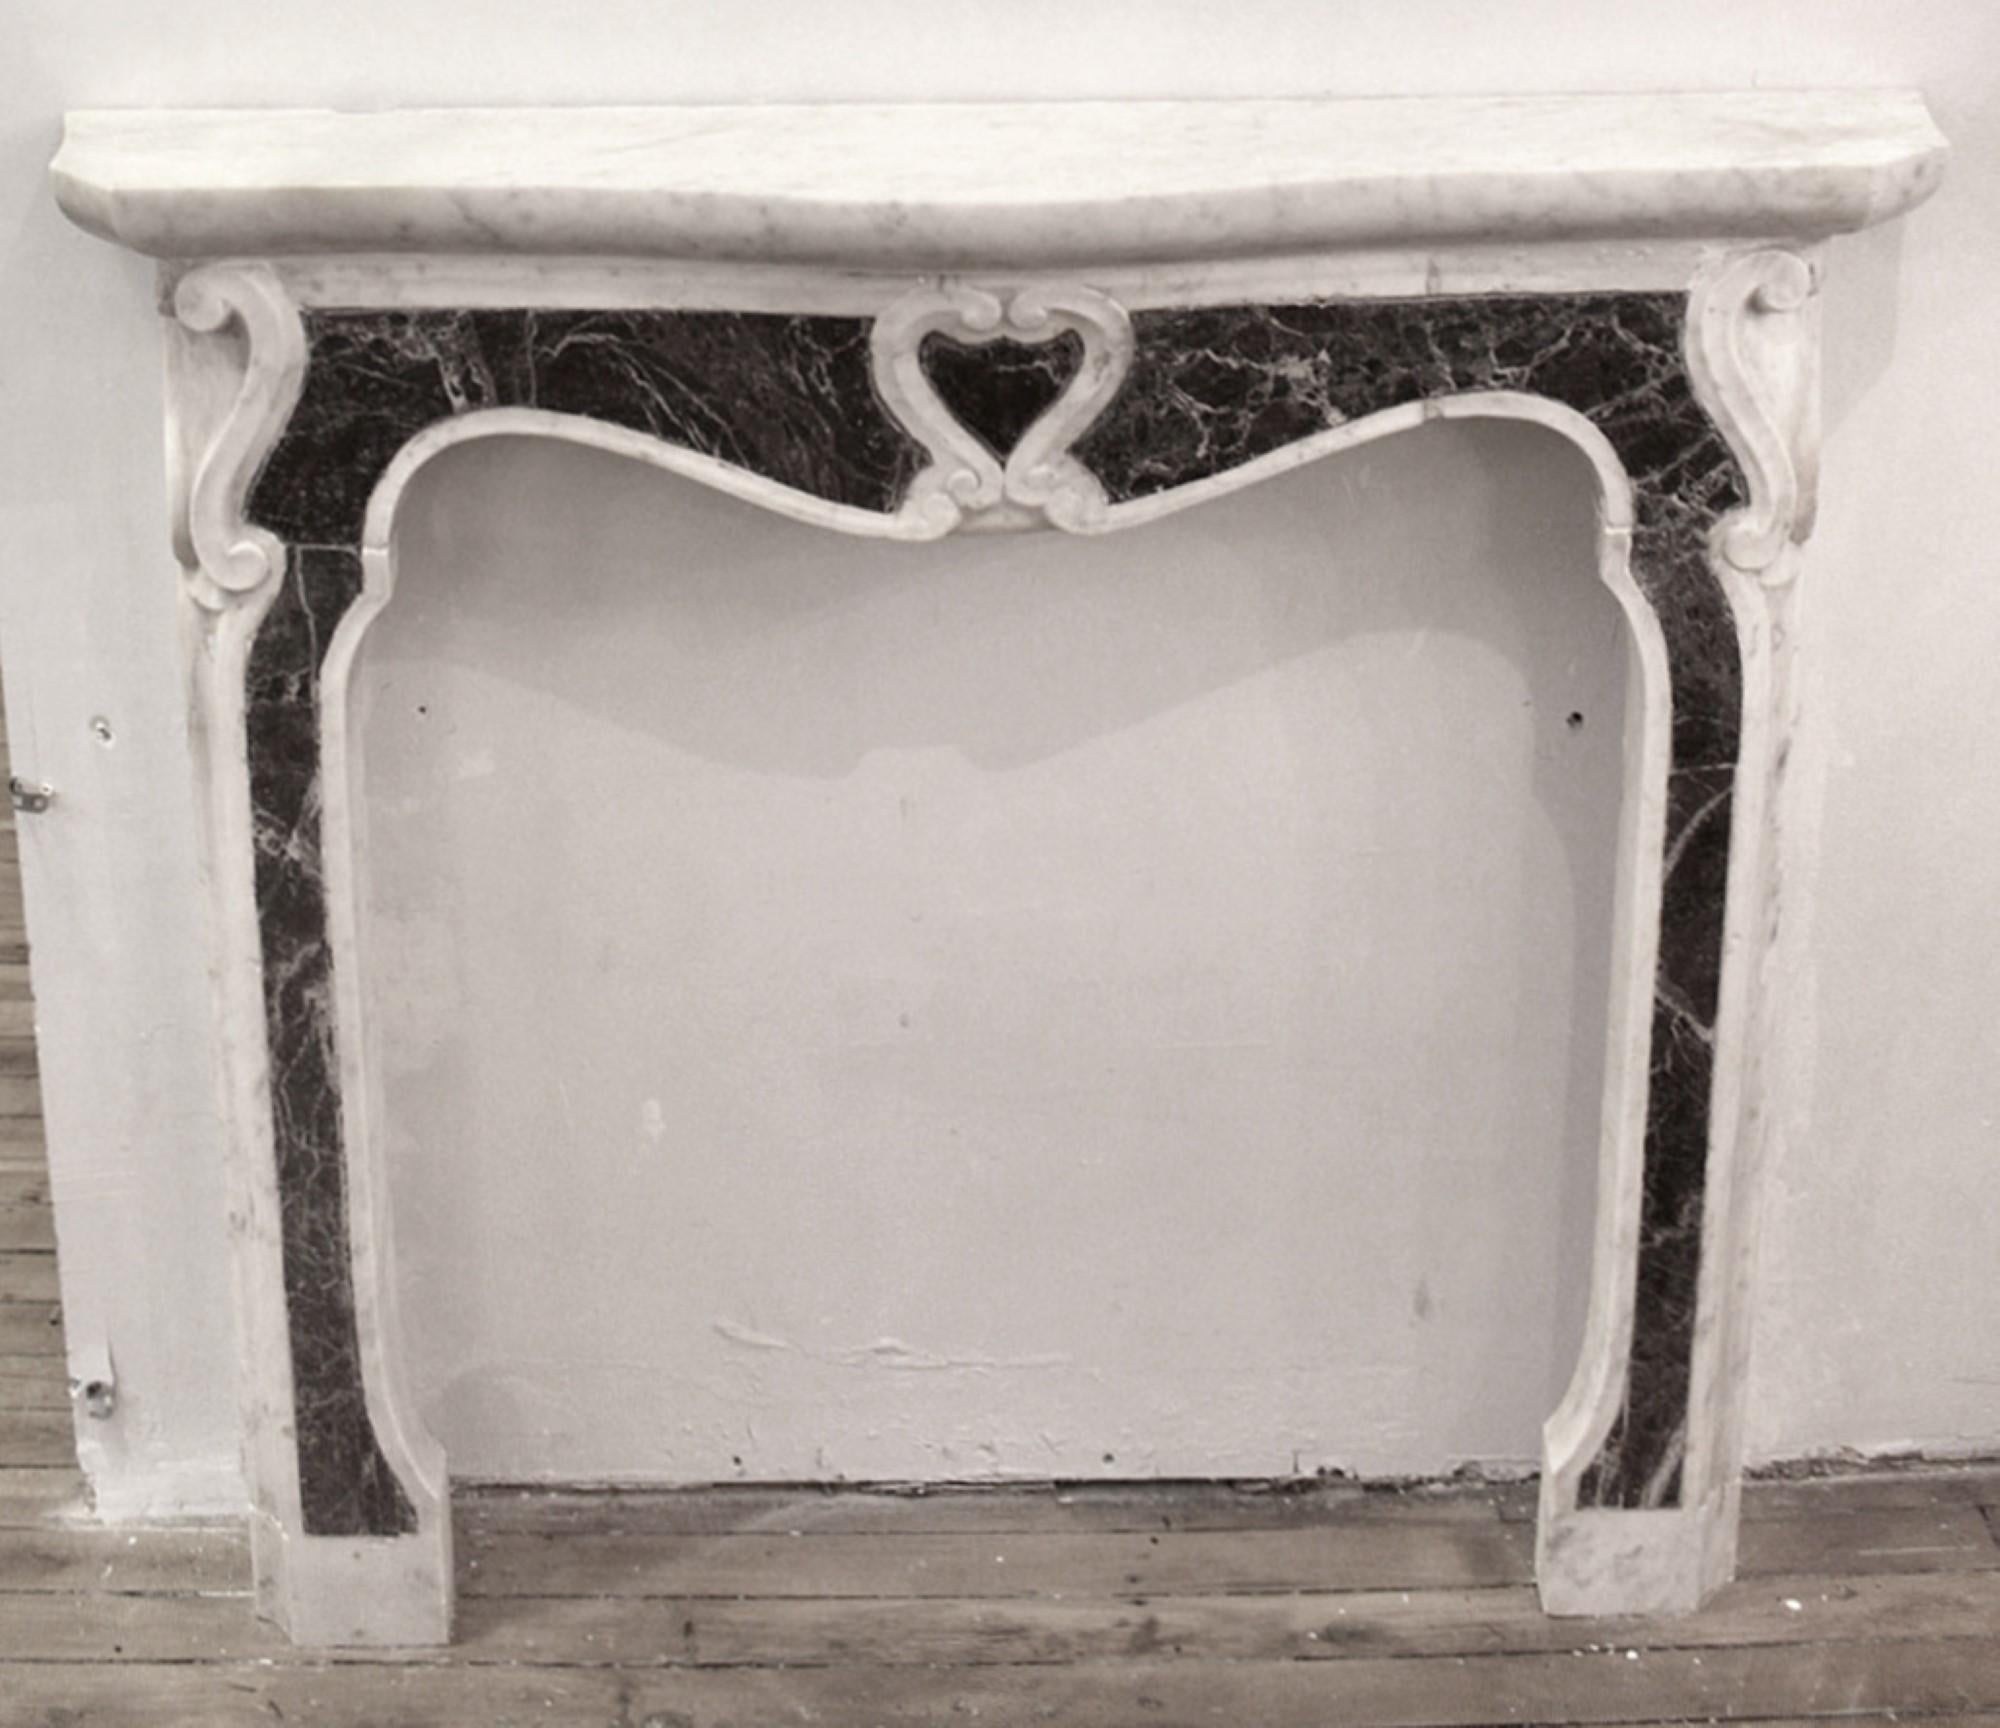 Exhibiting a remarkably distinctive Pompadour style, this marble fireplace mantel stands out with its exceptional features. The mantel showcases a harmonious blend of light gray Carrara marble and inlaid burgundy marble. Every facet of this design